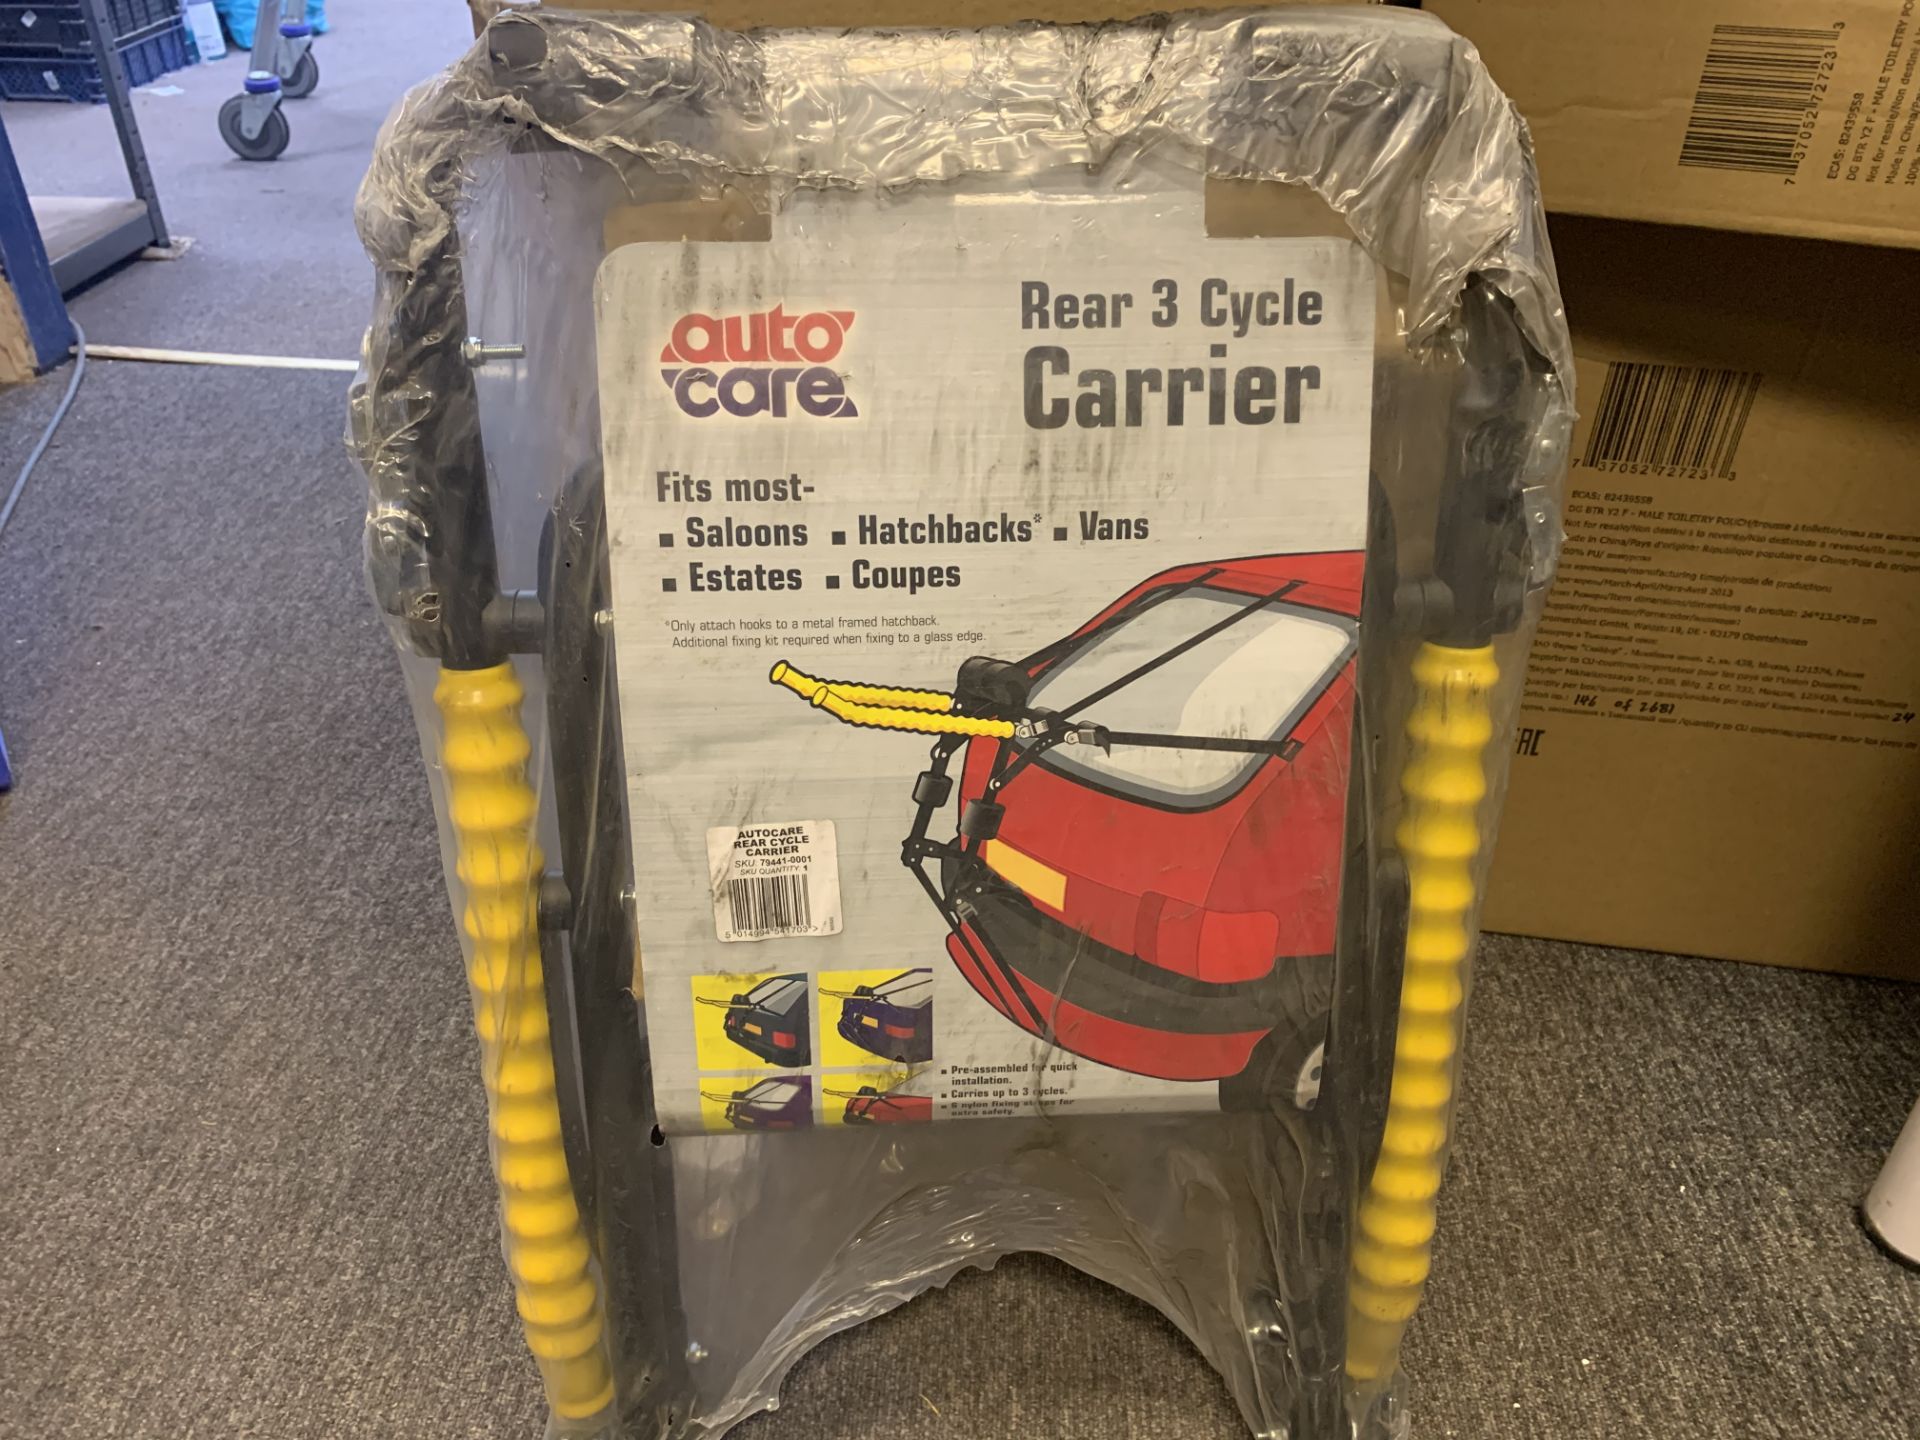 6 x NEW AUTOCARE REAR 3 CYCLE CARRIERS